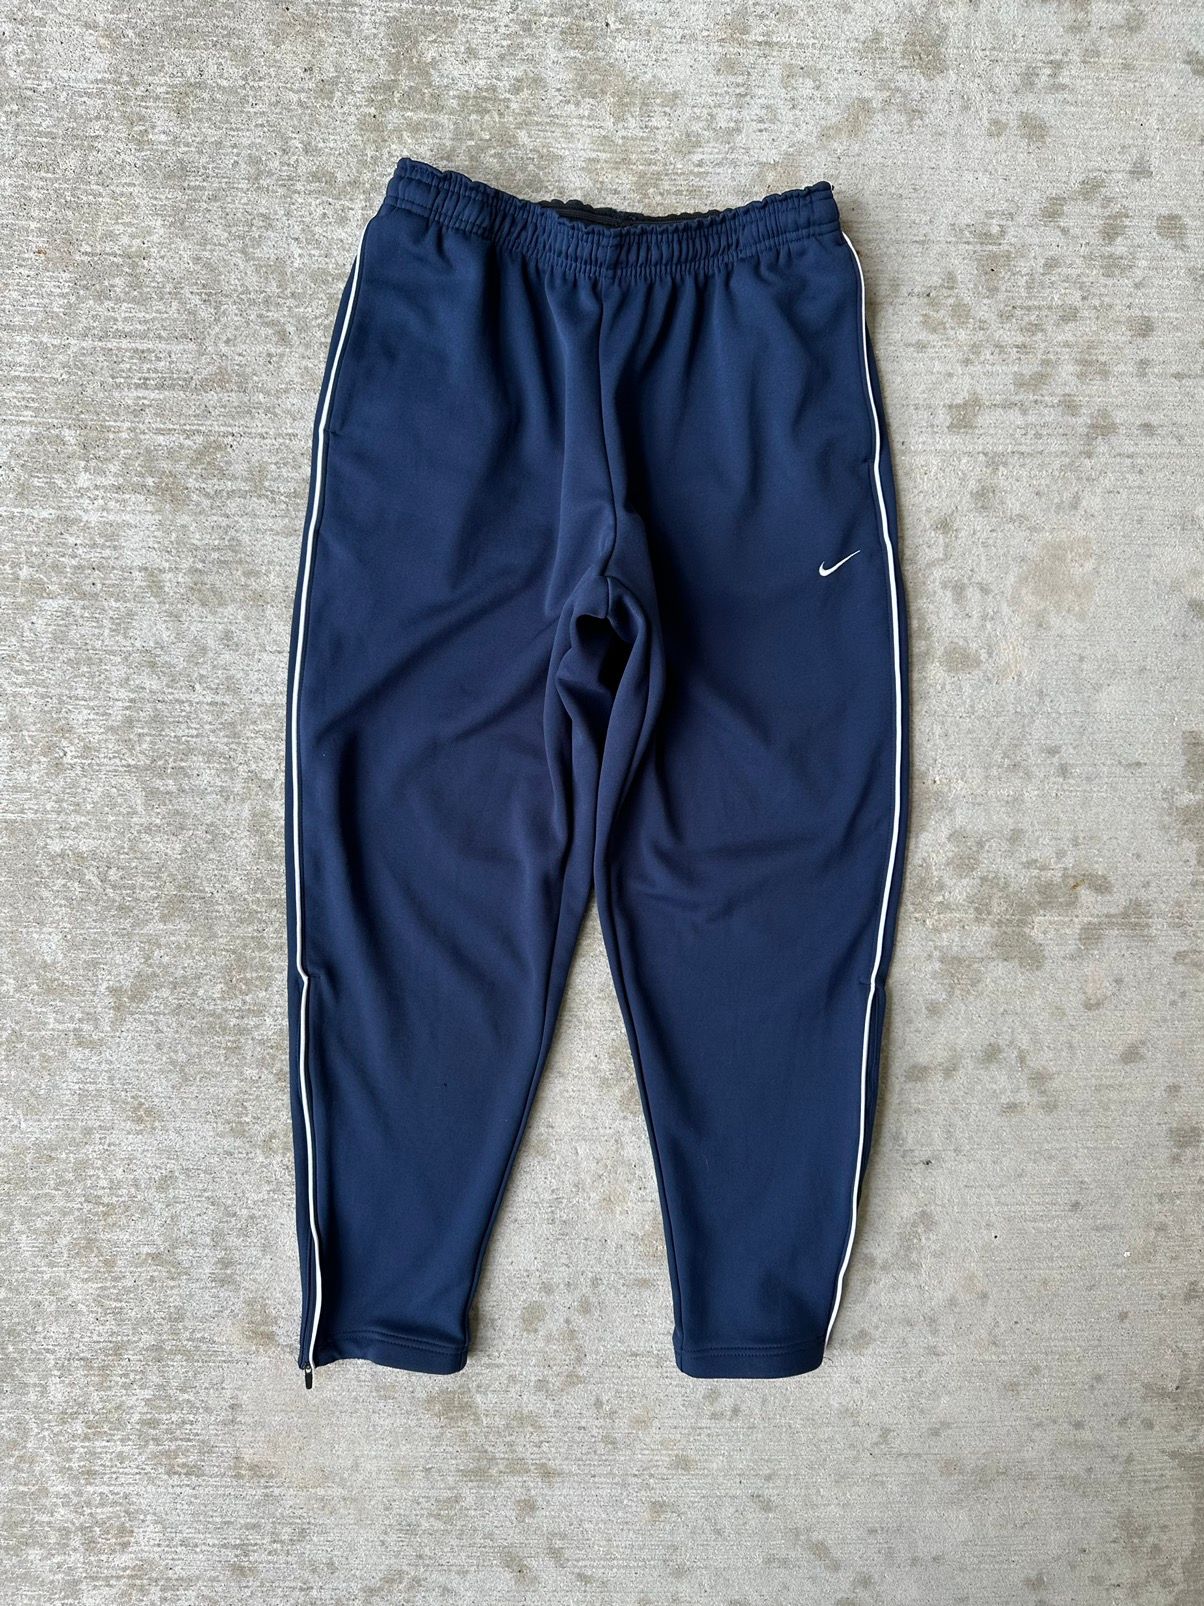 Nike Y2K Nike Track Drill Pants Size US 32 / EU 48 - 1 Preview